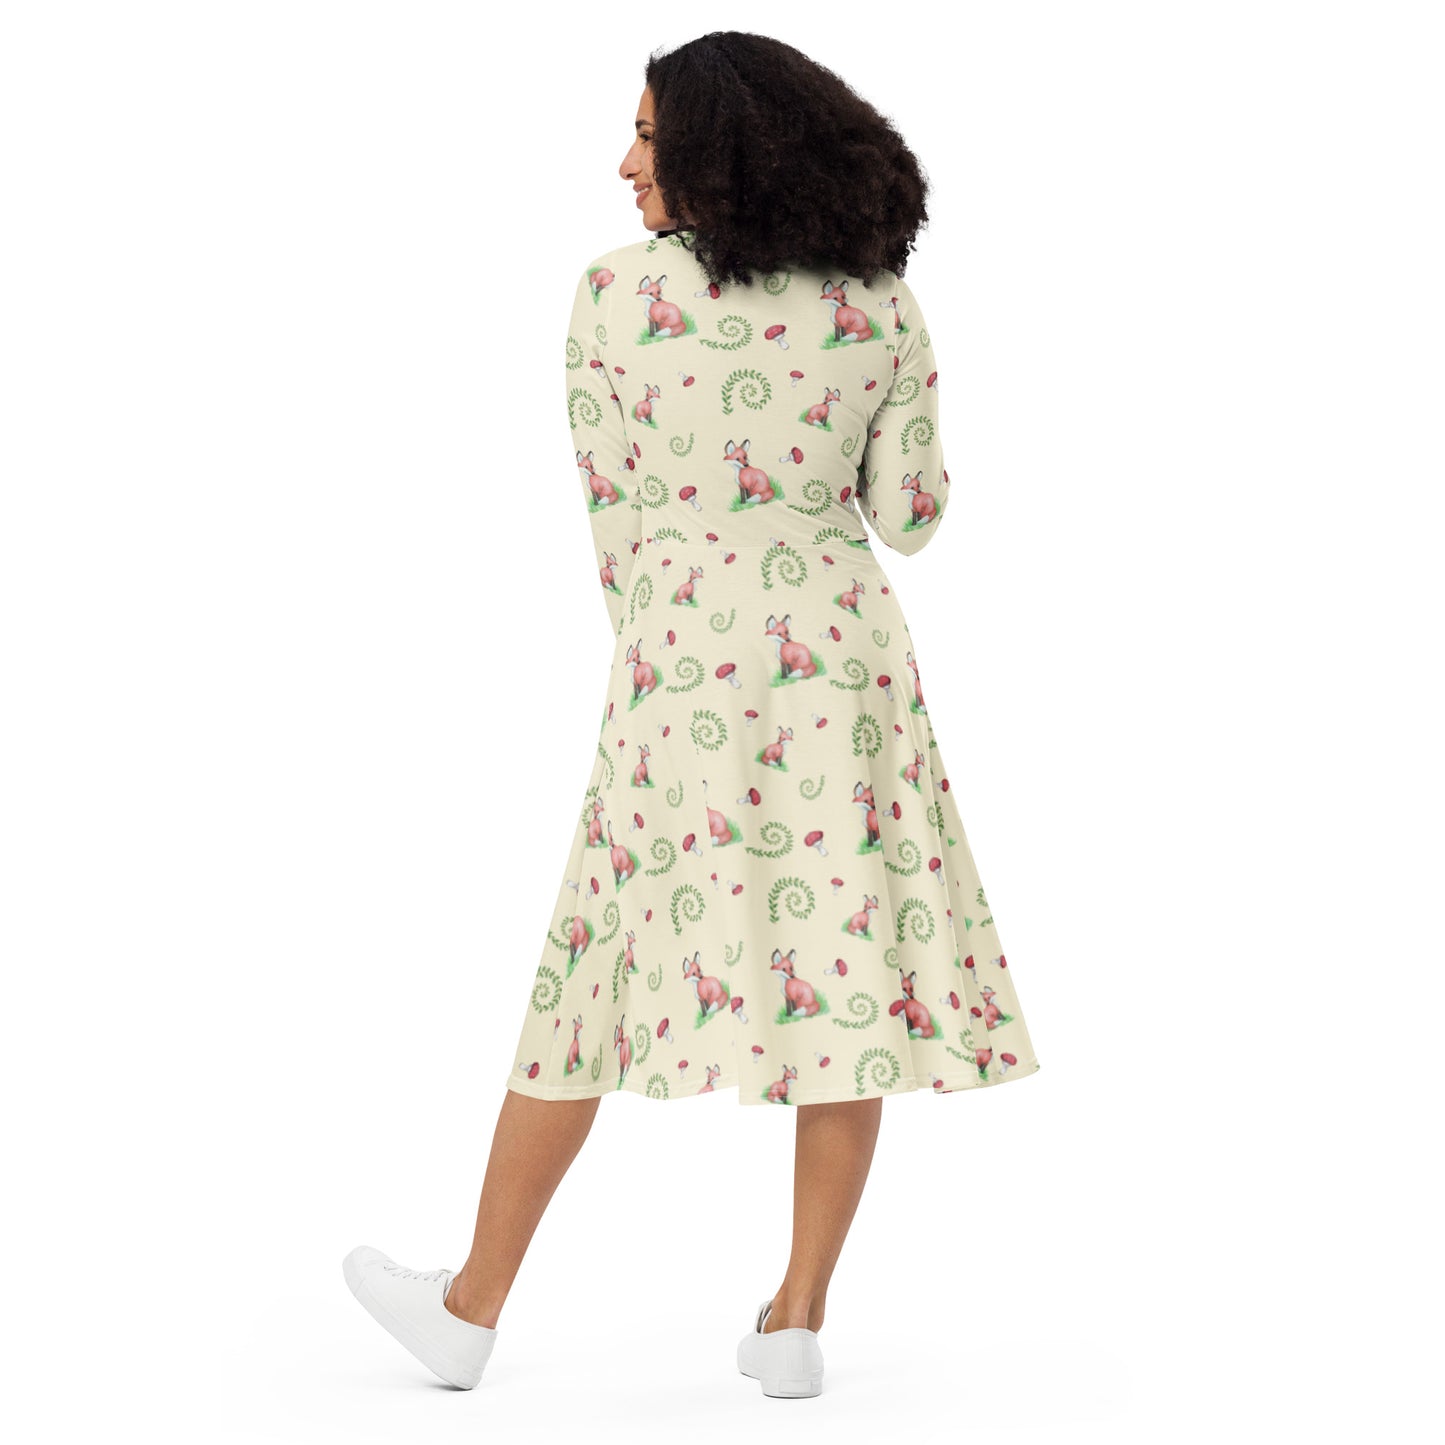 Fox pattern long sleeve midi dress with side pockets, fitted waist, and flared bottom. Foxes, ferns, and mushrooms are patterned on the apricot white fabric. Soft and comfortable. Back view on female model.